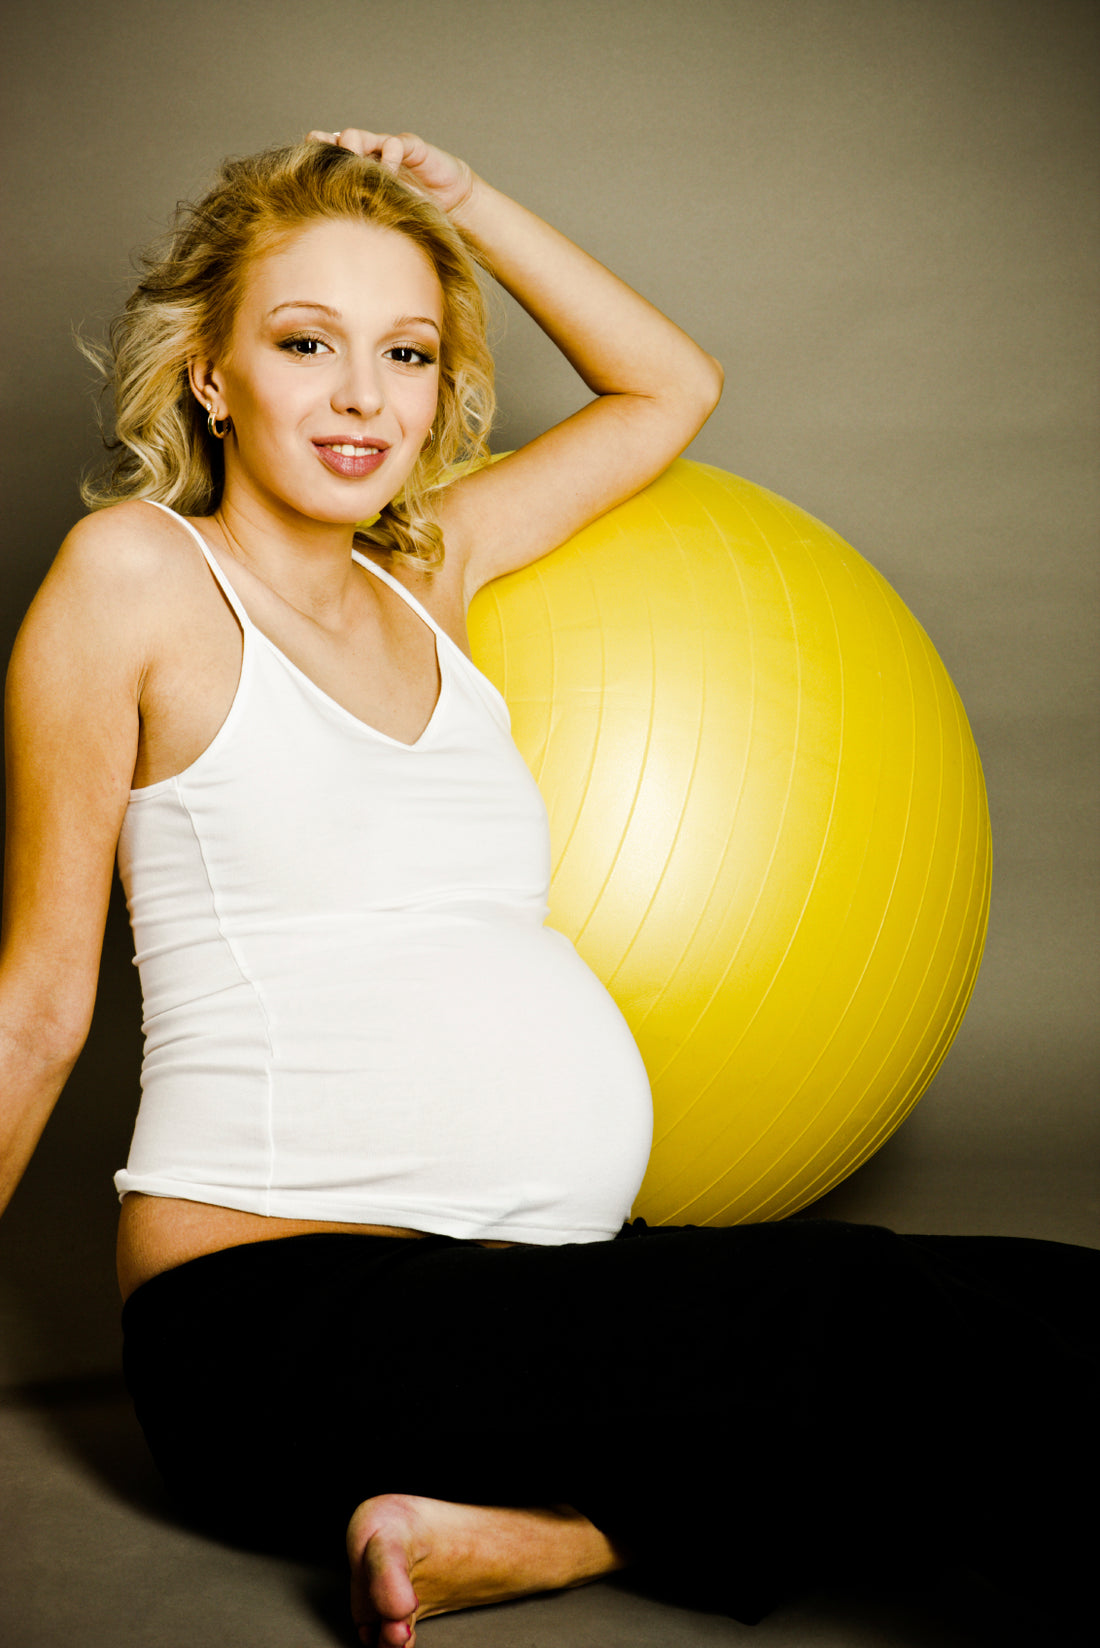 Pilates and Pregnancy: Exercise Guidelines - Resources for More Information